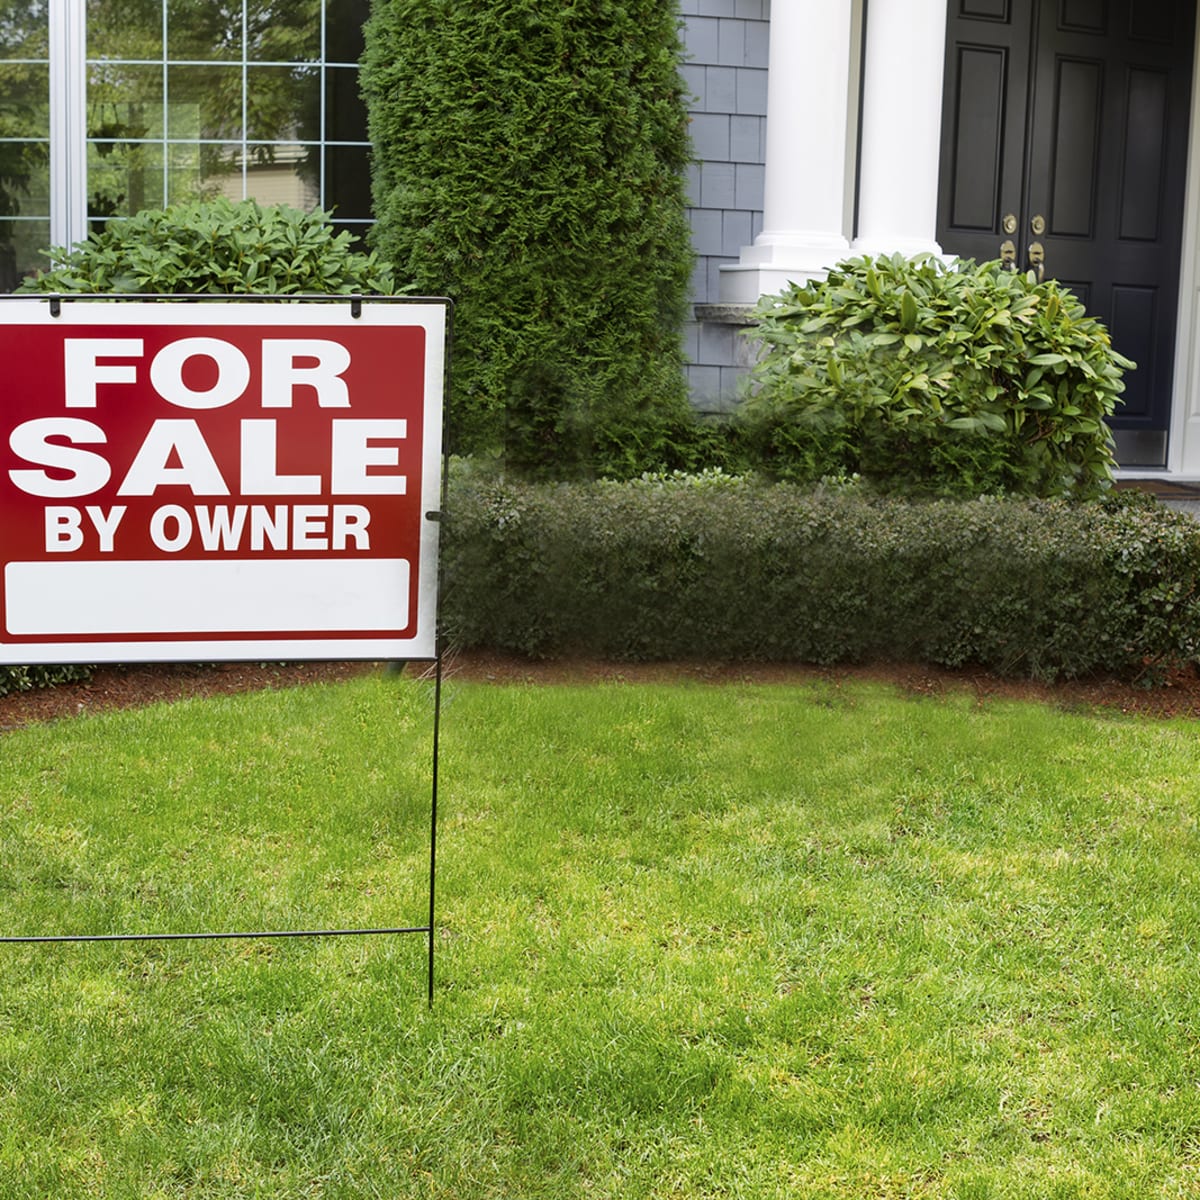 How To Sell Your House Without A Real Estate Agent In 2019 Thestreet